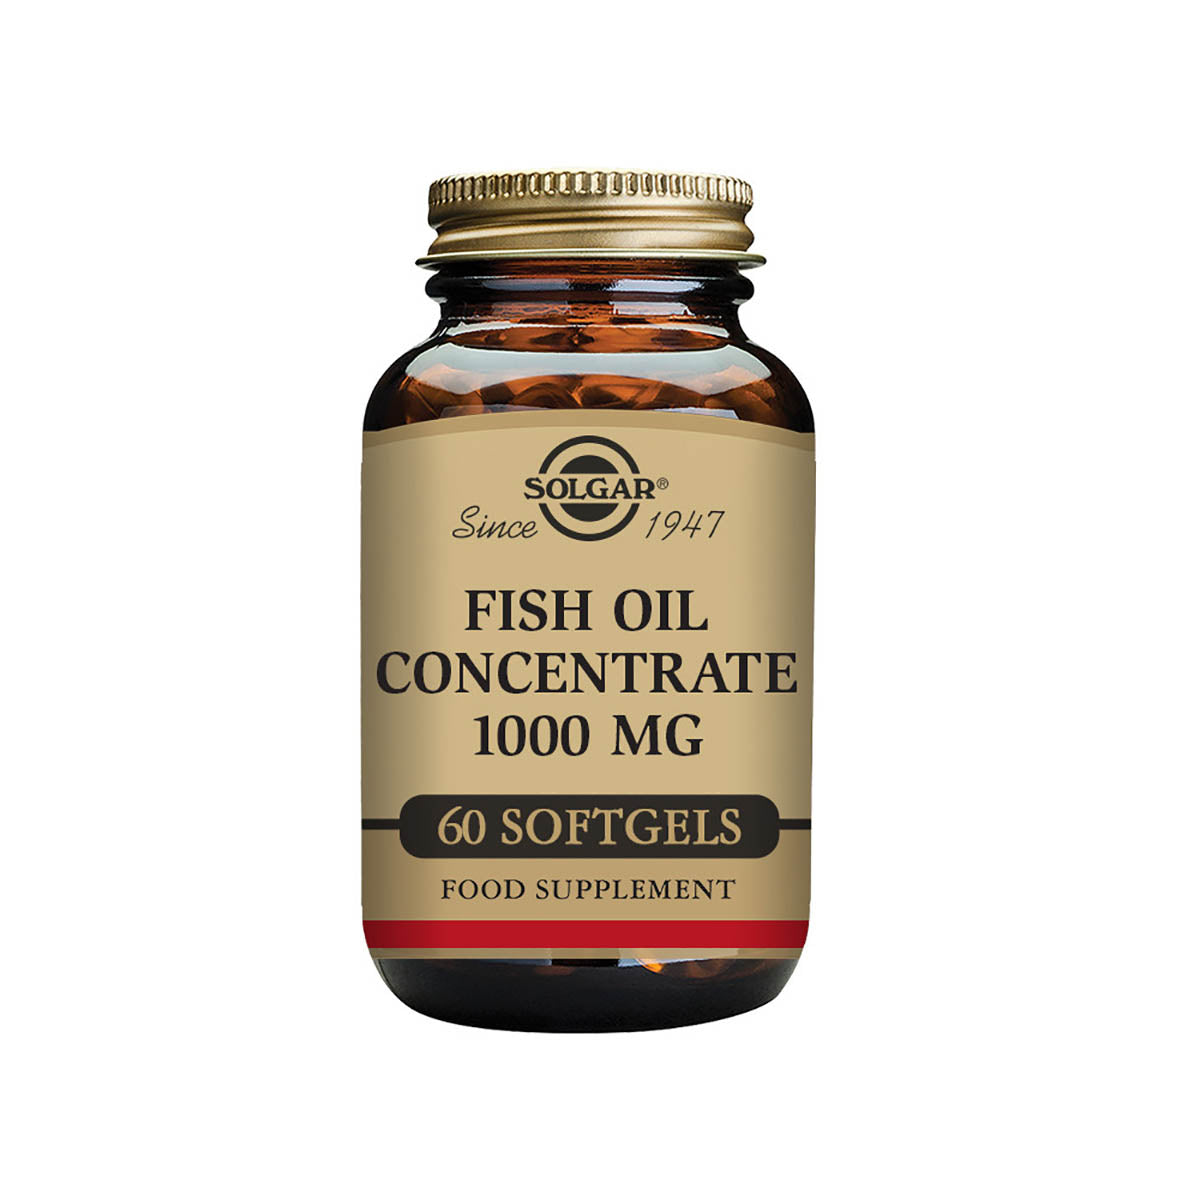 Solgar® Fish Oil Concentrate 1000 mg Softgels - Pack of 60